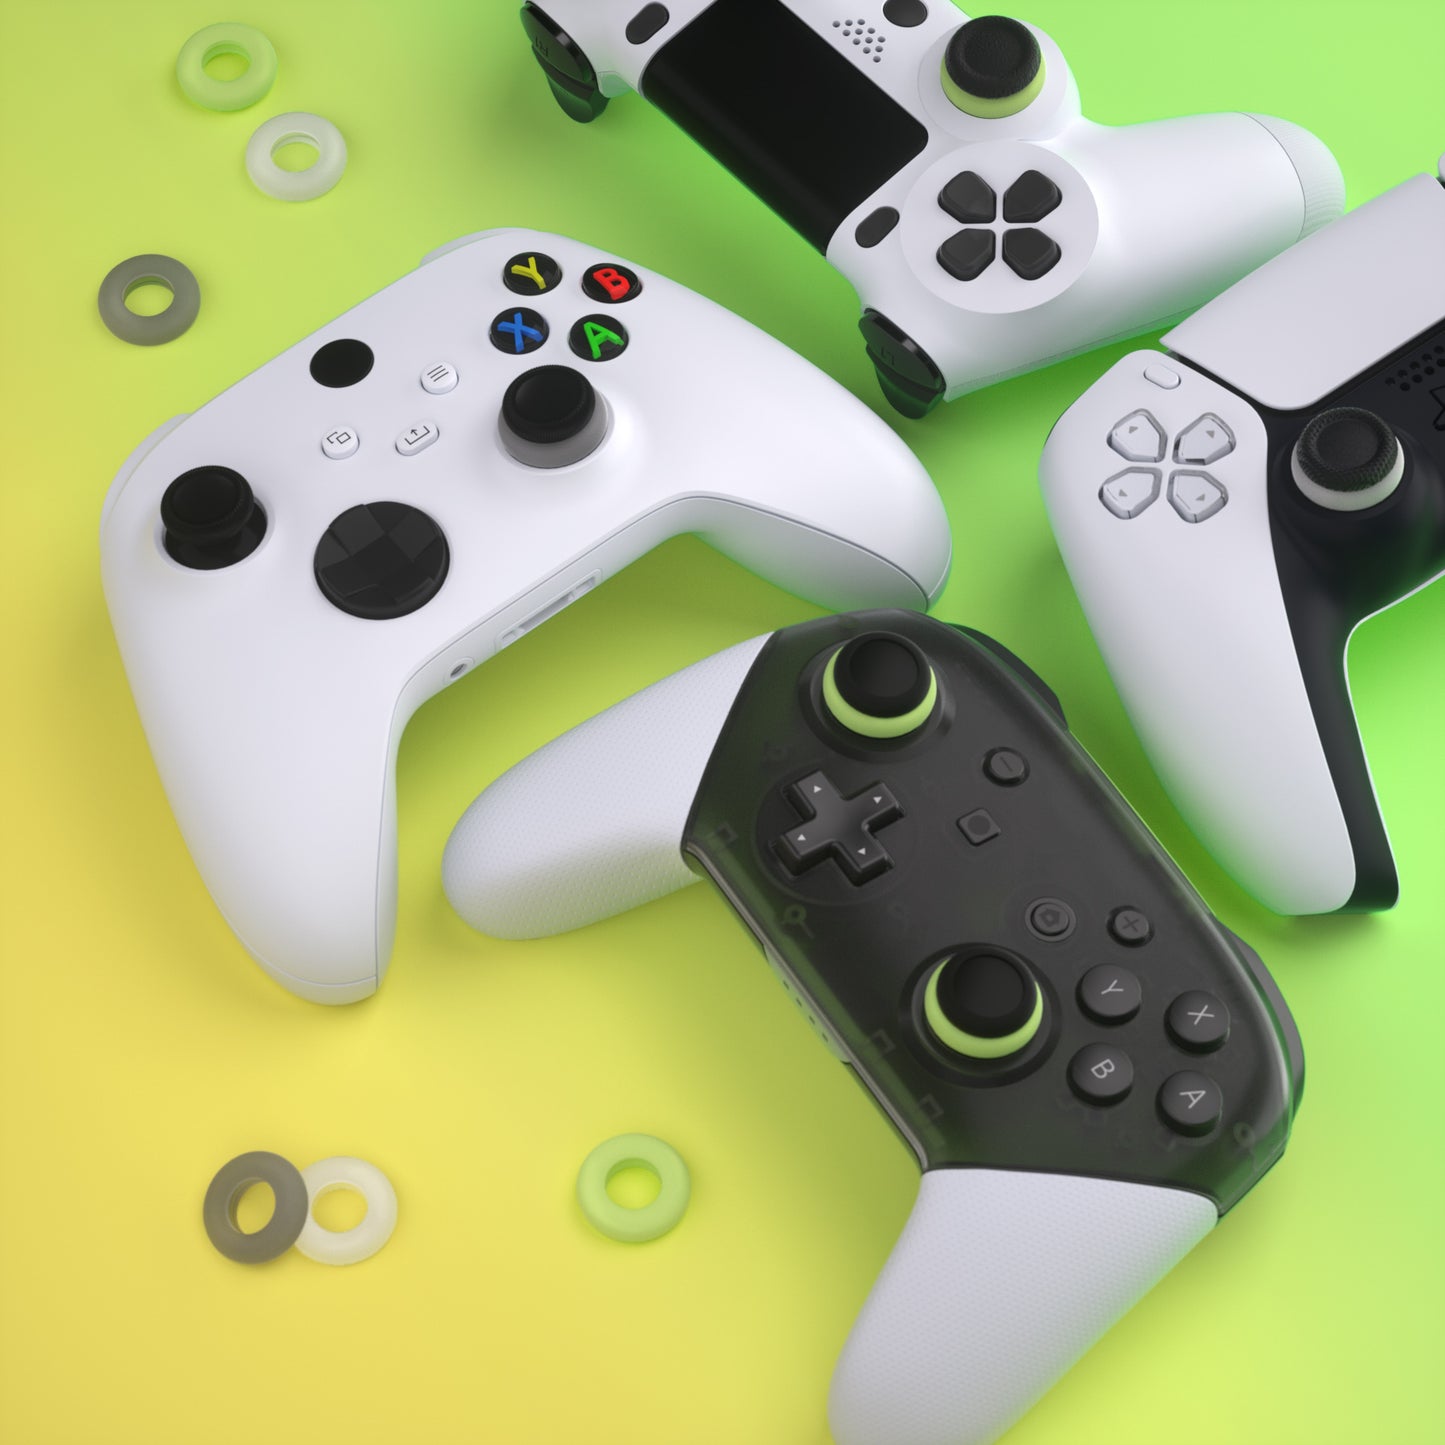 Products PlayVital 5 Pairs Aim Assist Target Motion Control Precision Rings for ps5, for ps4, for Xbox Series X/S, Xbox One, Xbox 360, for Switch Pro Controller, for Steam Deck - Clear Black White & Glow in Dark Green - PFPJ118 PlayVital